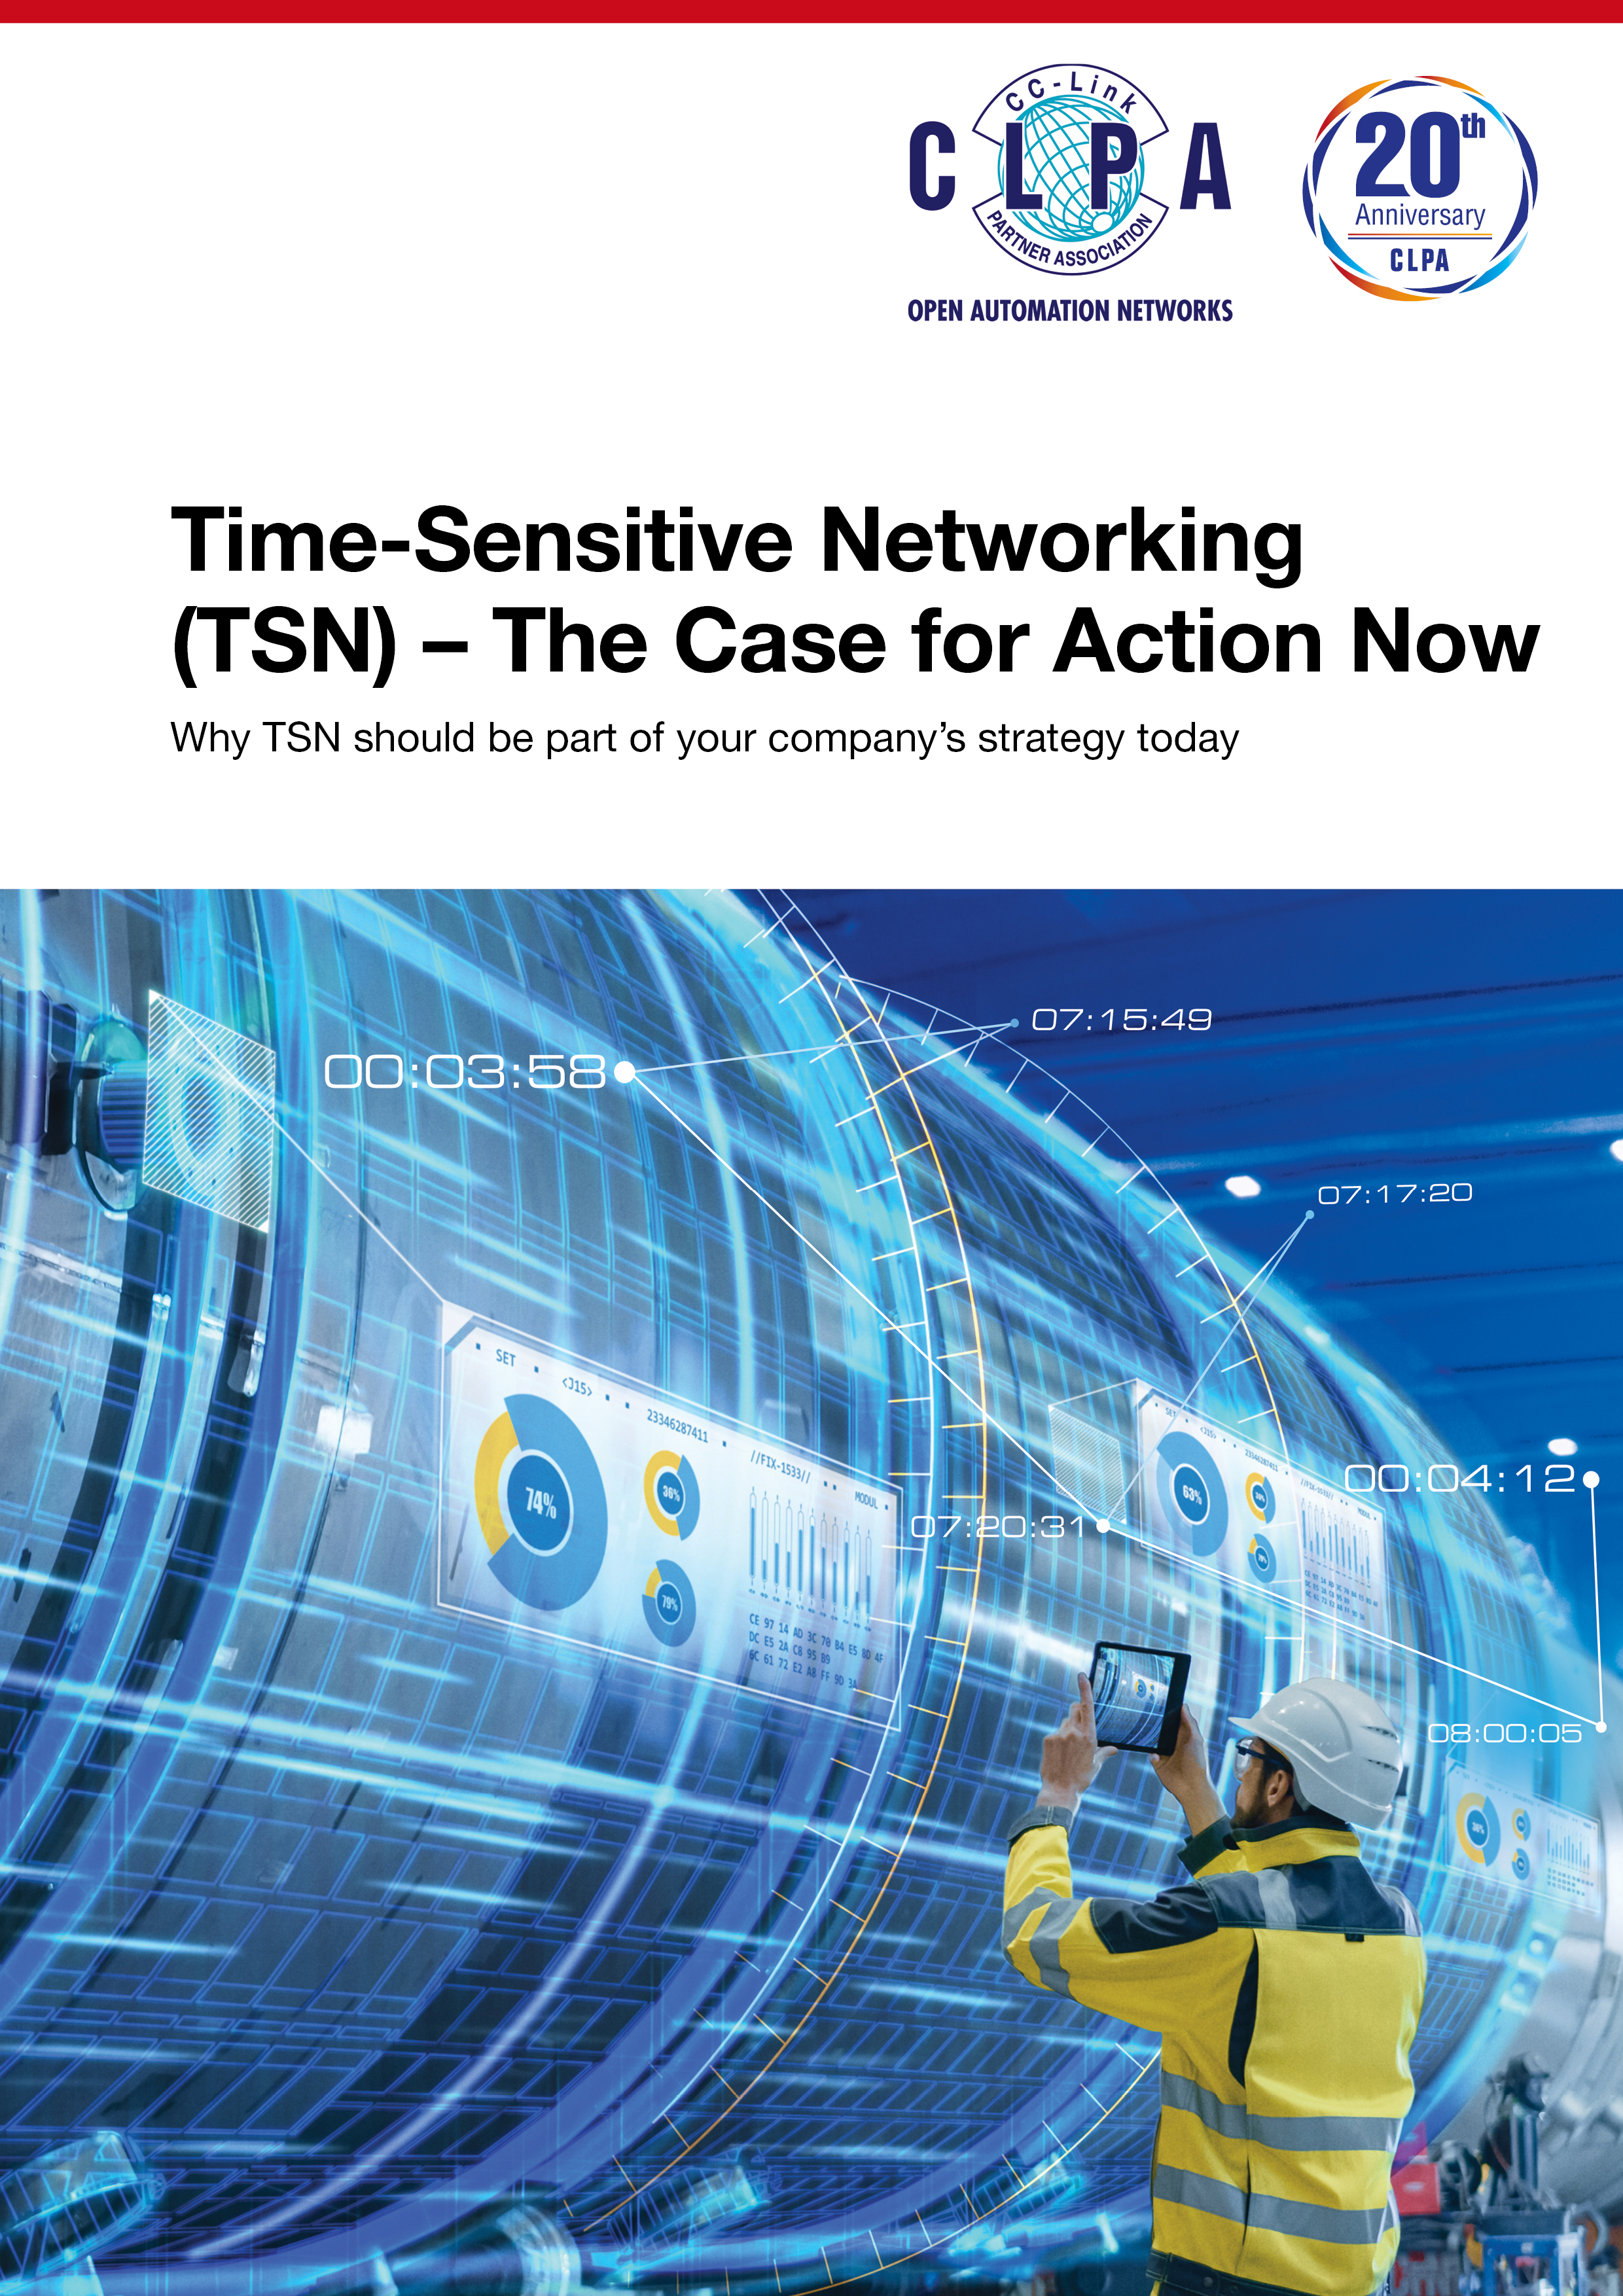 “Time-Sensitive Networking (TSN) – The Case For Action Now!”